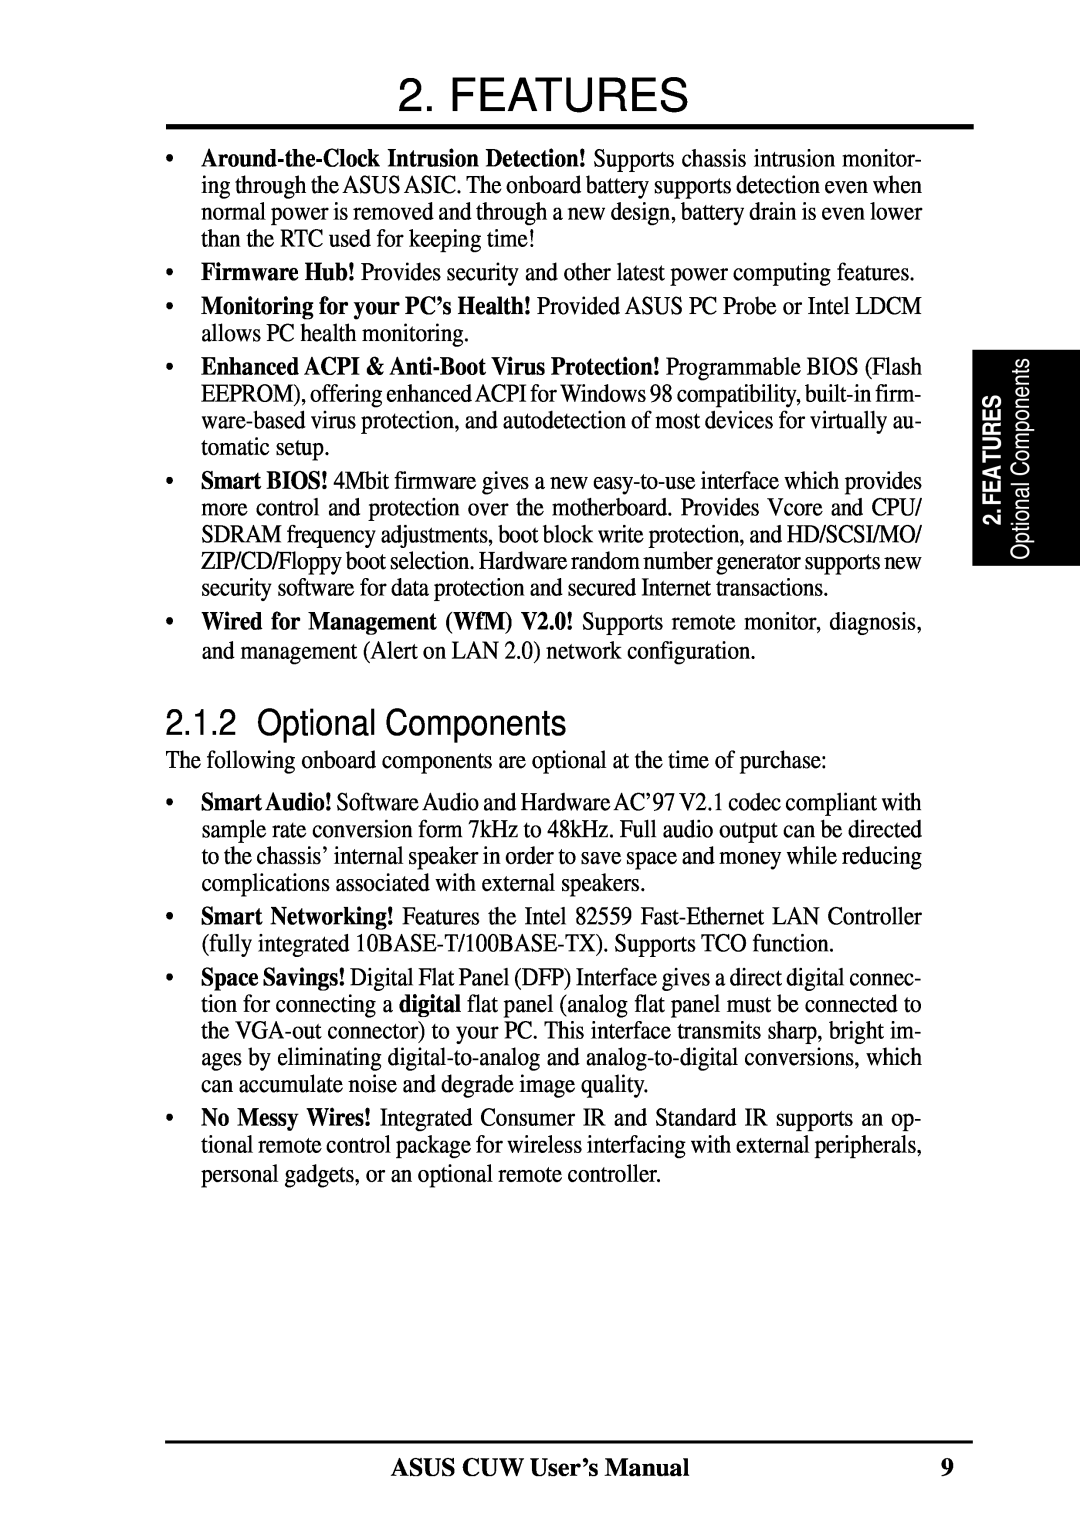 Asus 810 user manual Optional Components, Features, OptionalComponents, ASUS CUW User’s Manual 